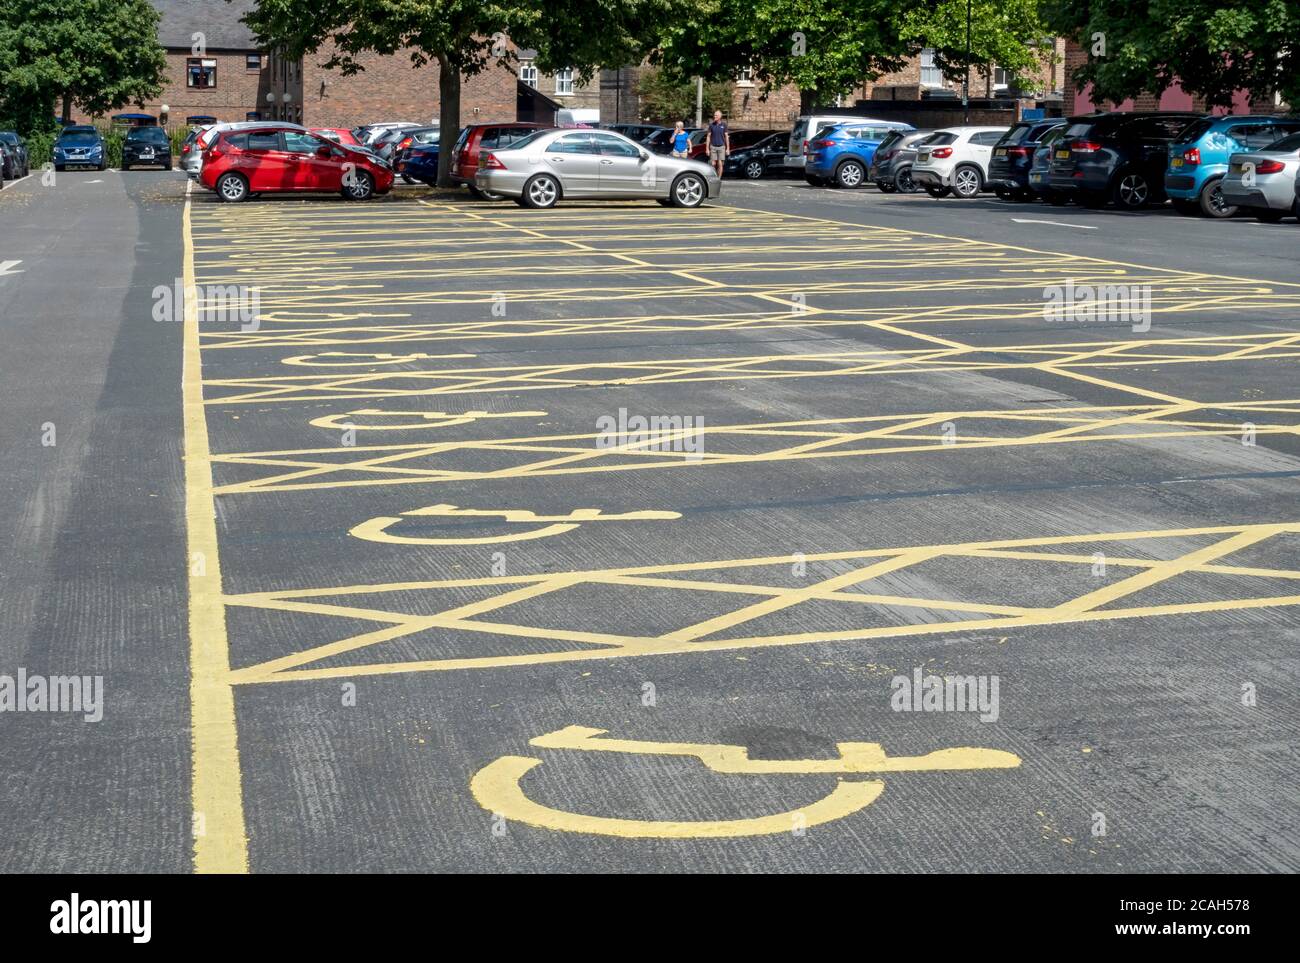 Disabled parking space spaces in city town car park York North Yorkshire England UK United Kingdom GB Great Britain Stock Photo